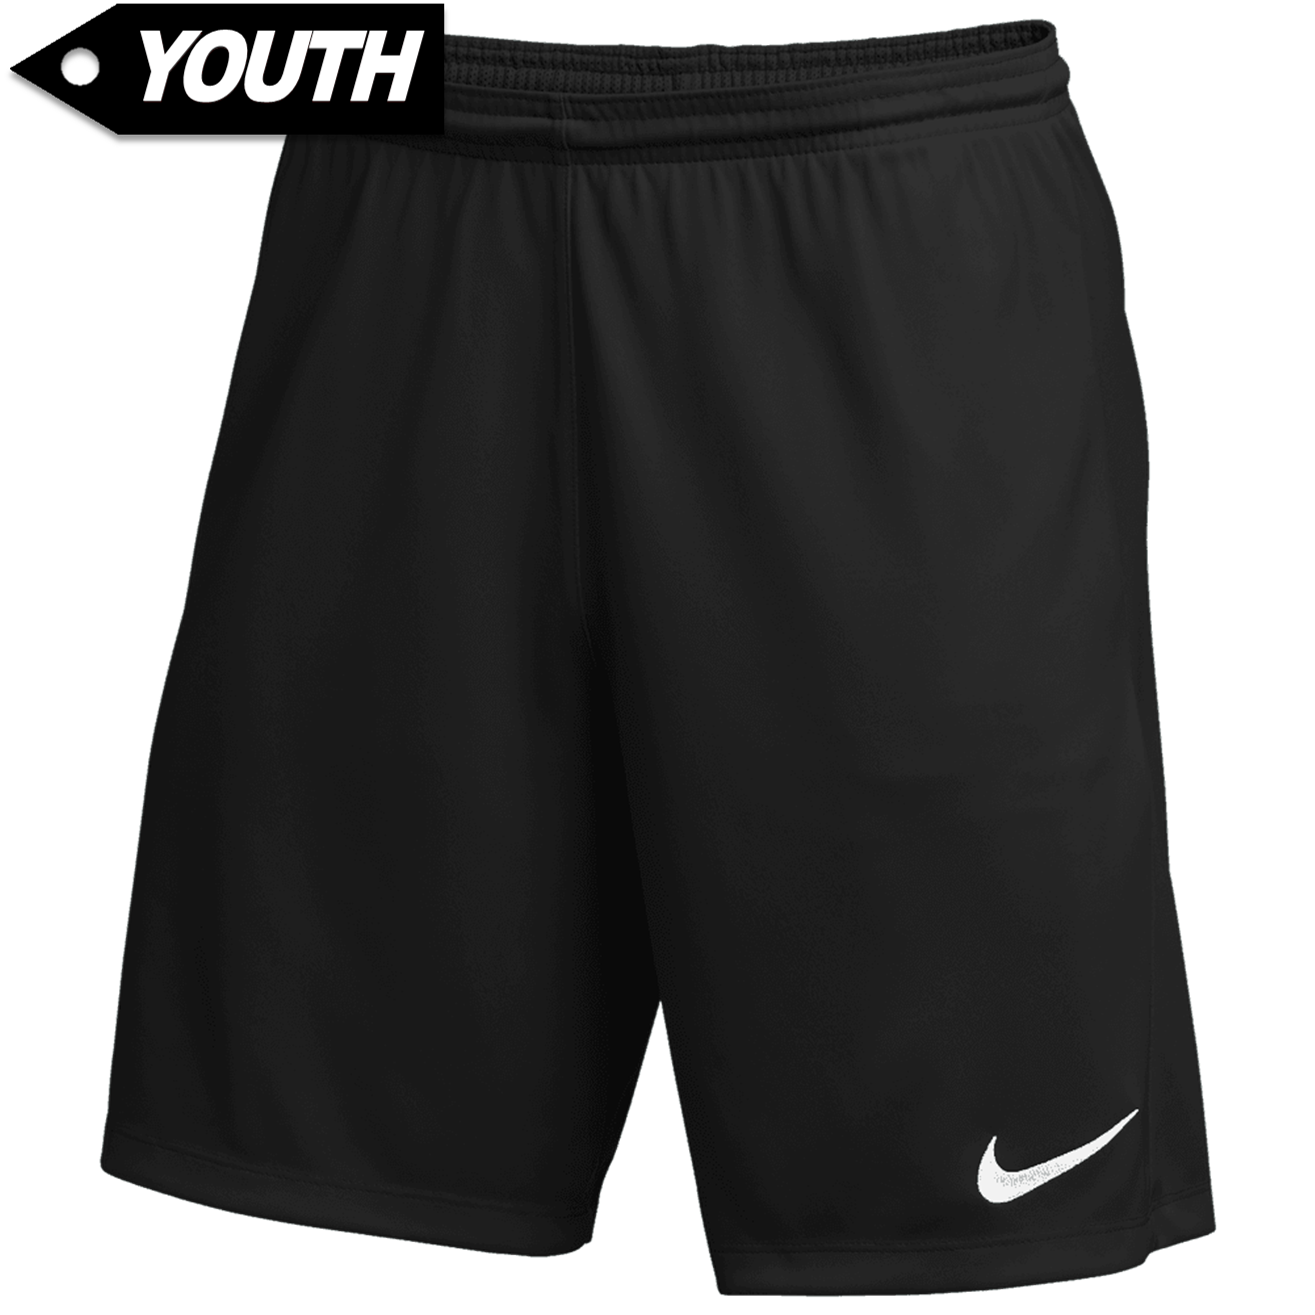 Sandpoint FC Shorts [Youth]